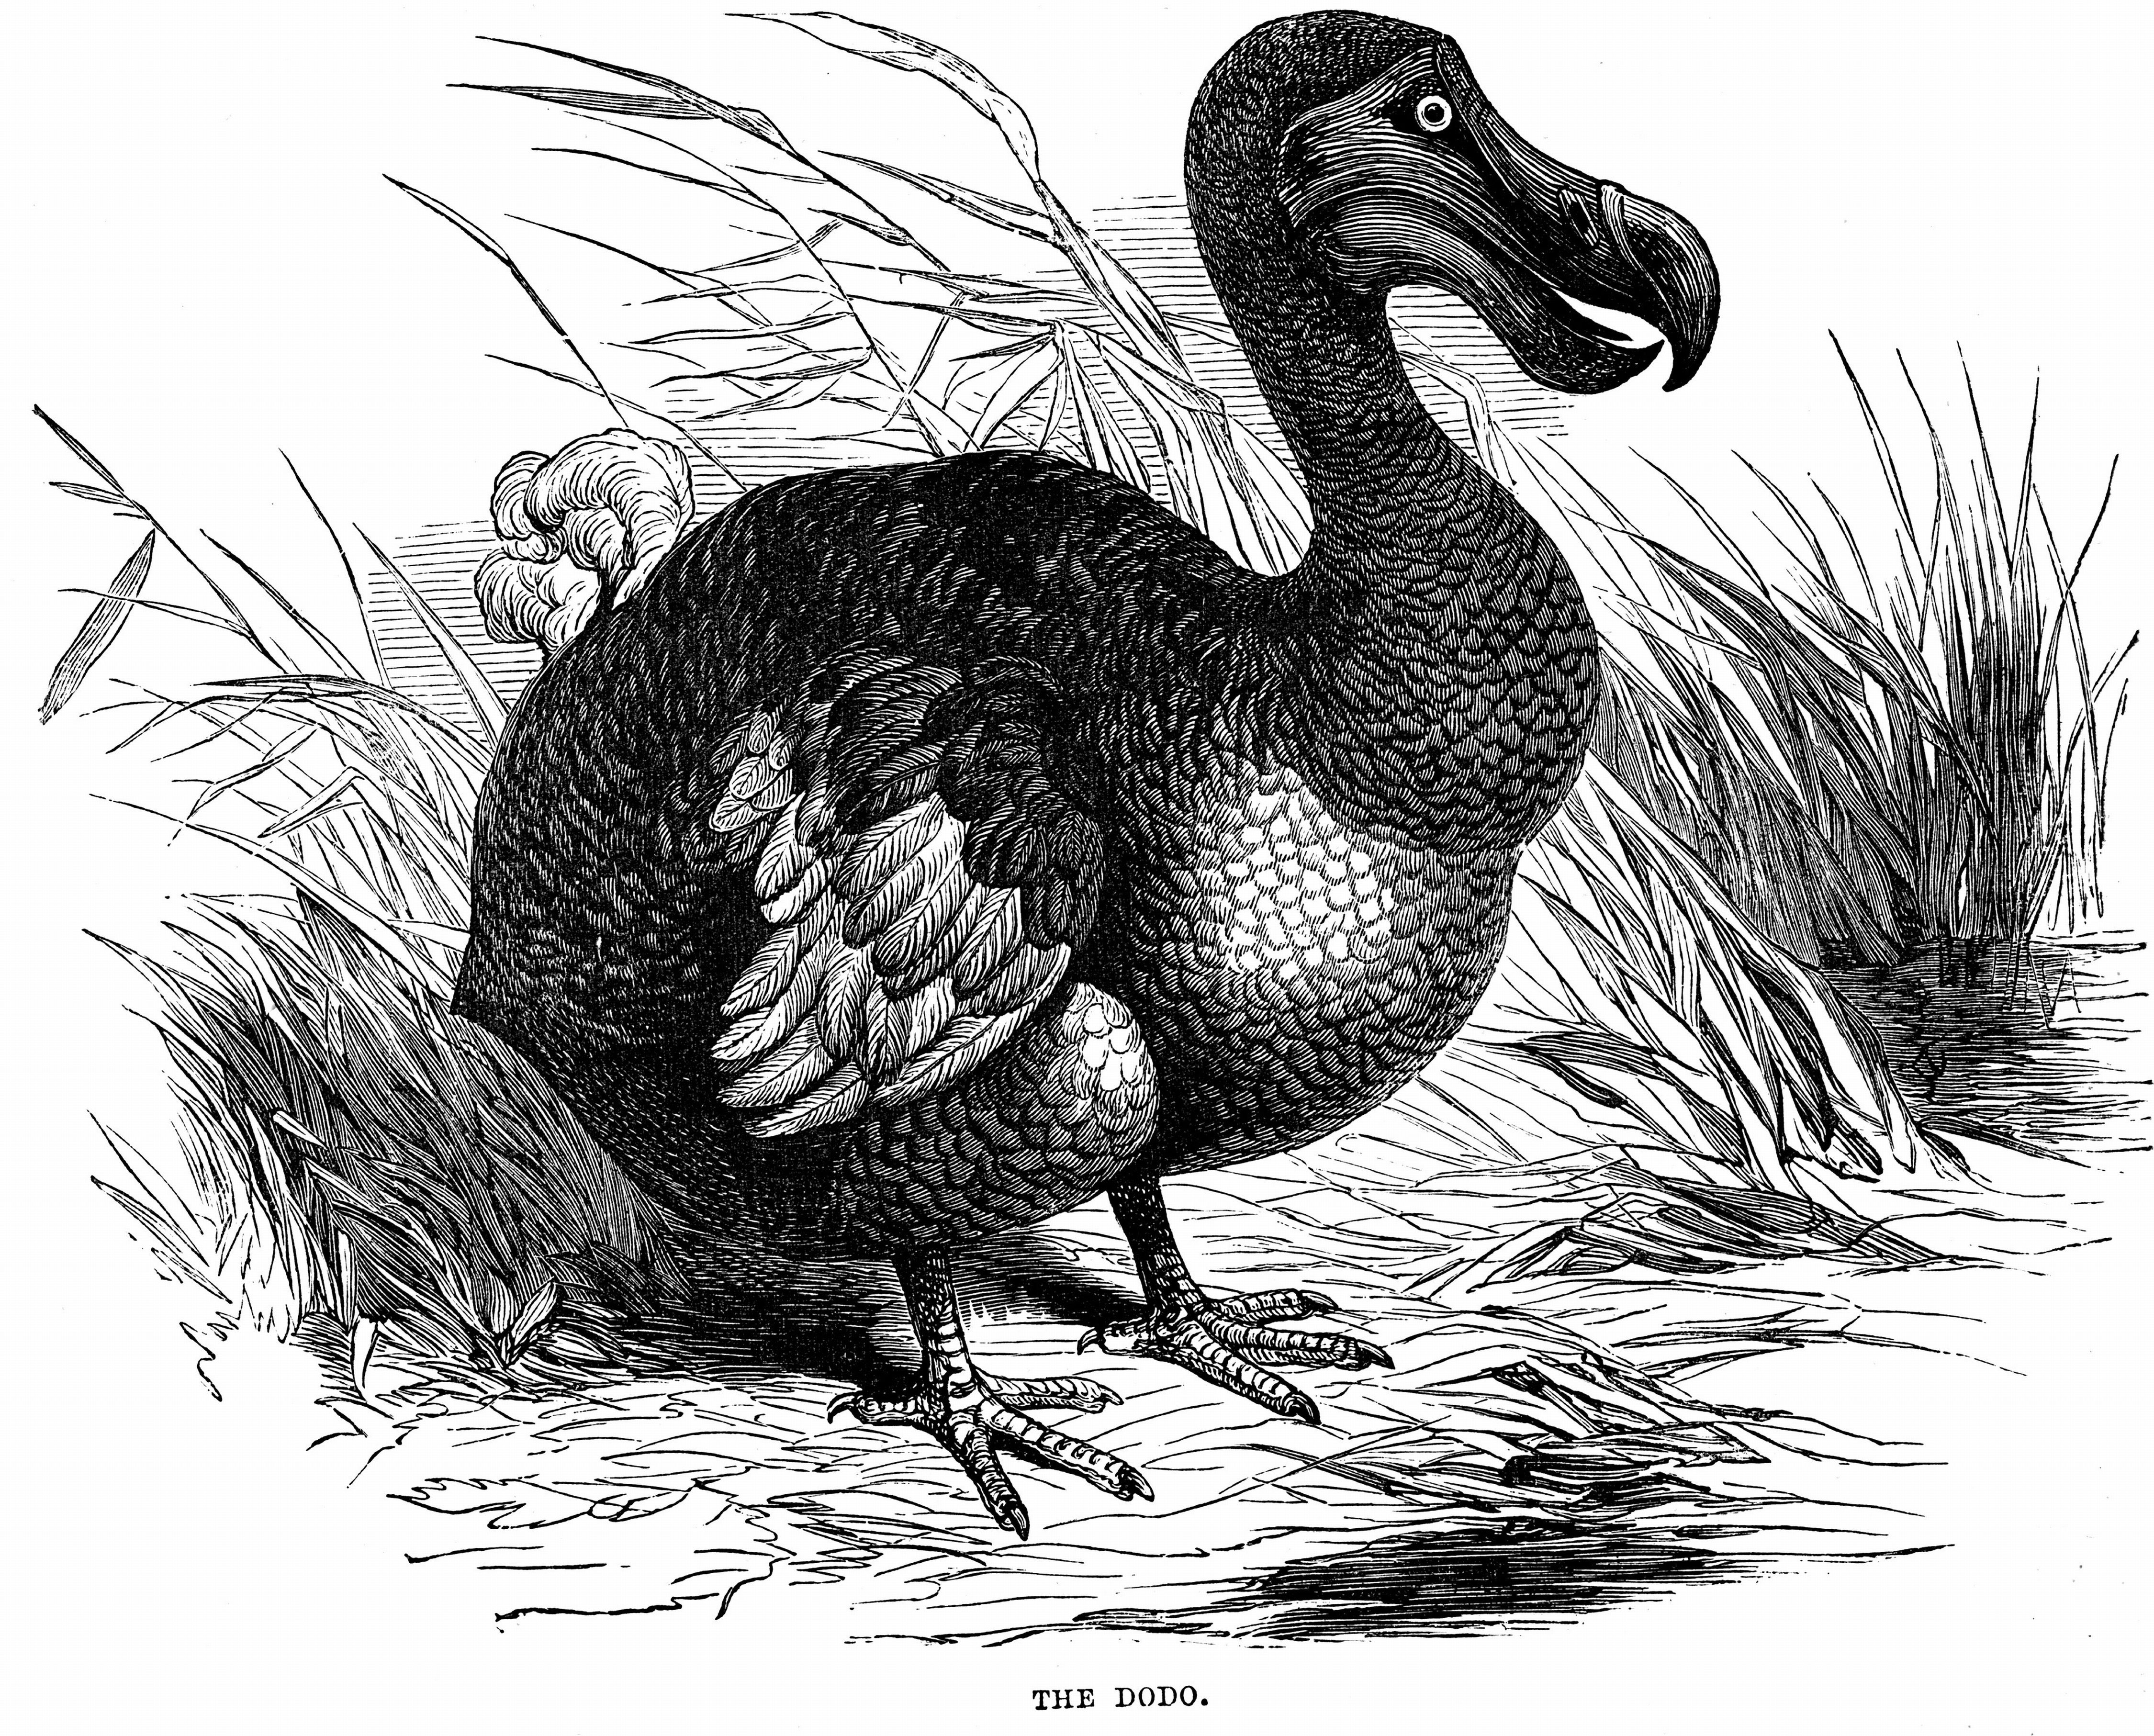 First observed by Portuguese sailors in about 1507, by 1681 the Dodo was extinct due to a combination of circumstances including killing for food by men, introduction of animals such as the rate, and destruction of habitat. Wood engraving 1884. (Universal History Archive&mdash;Getty Images)